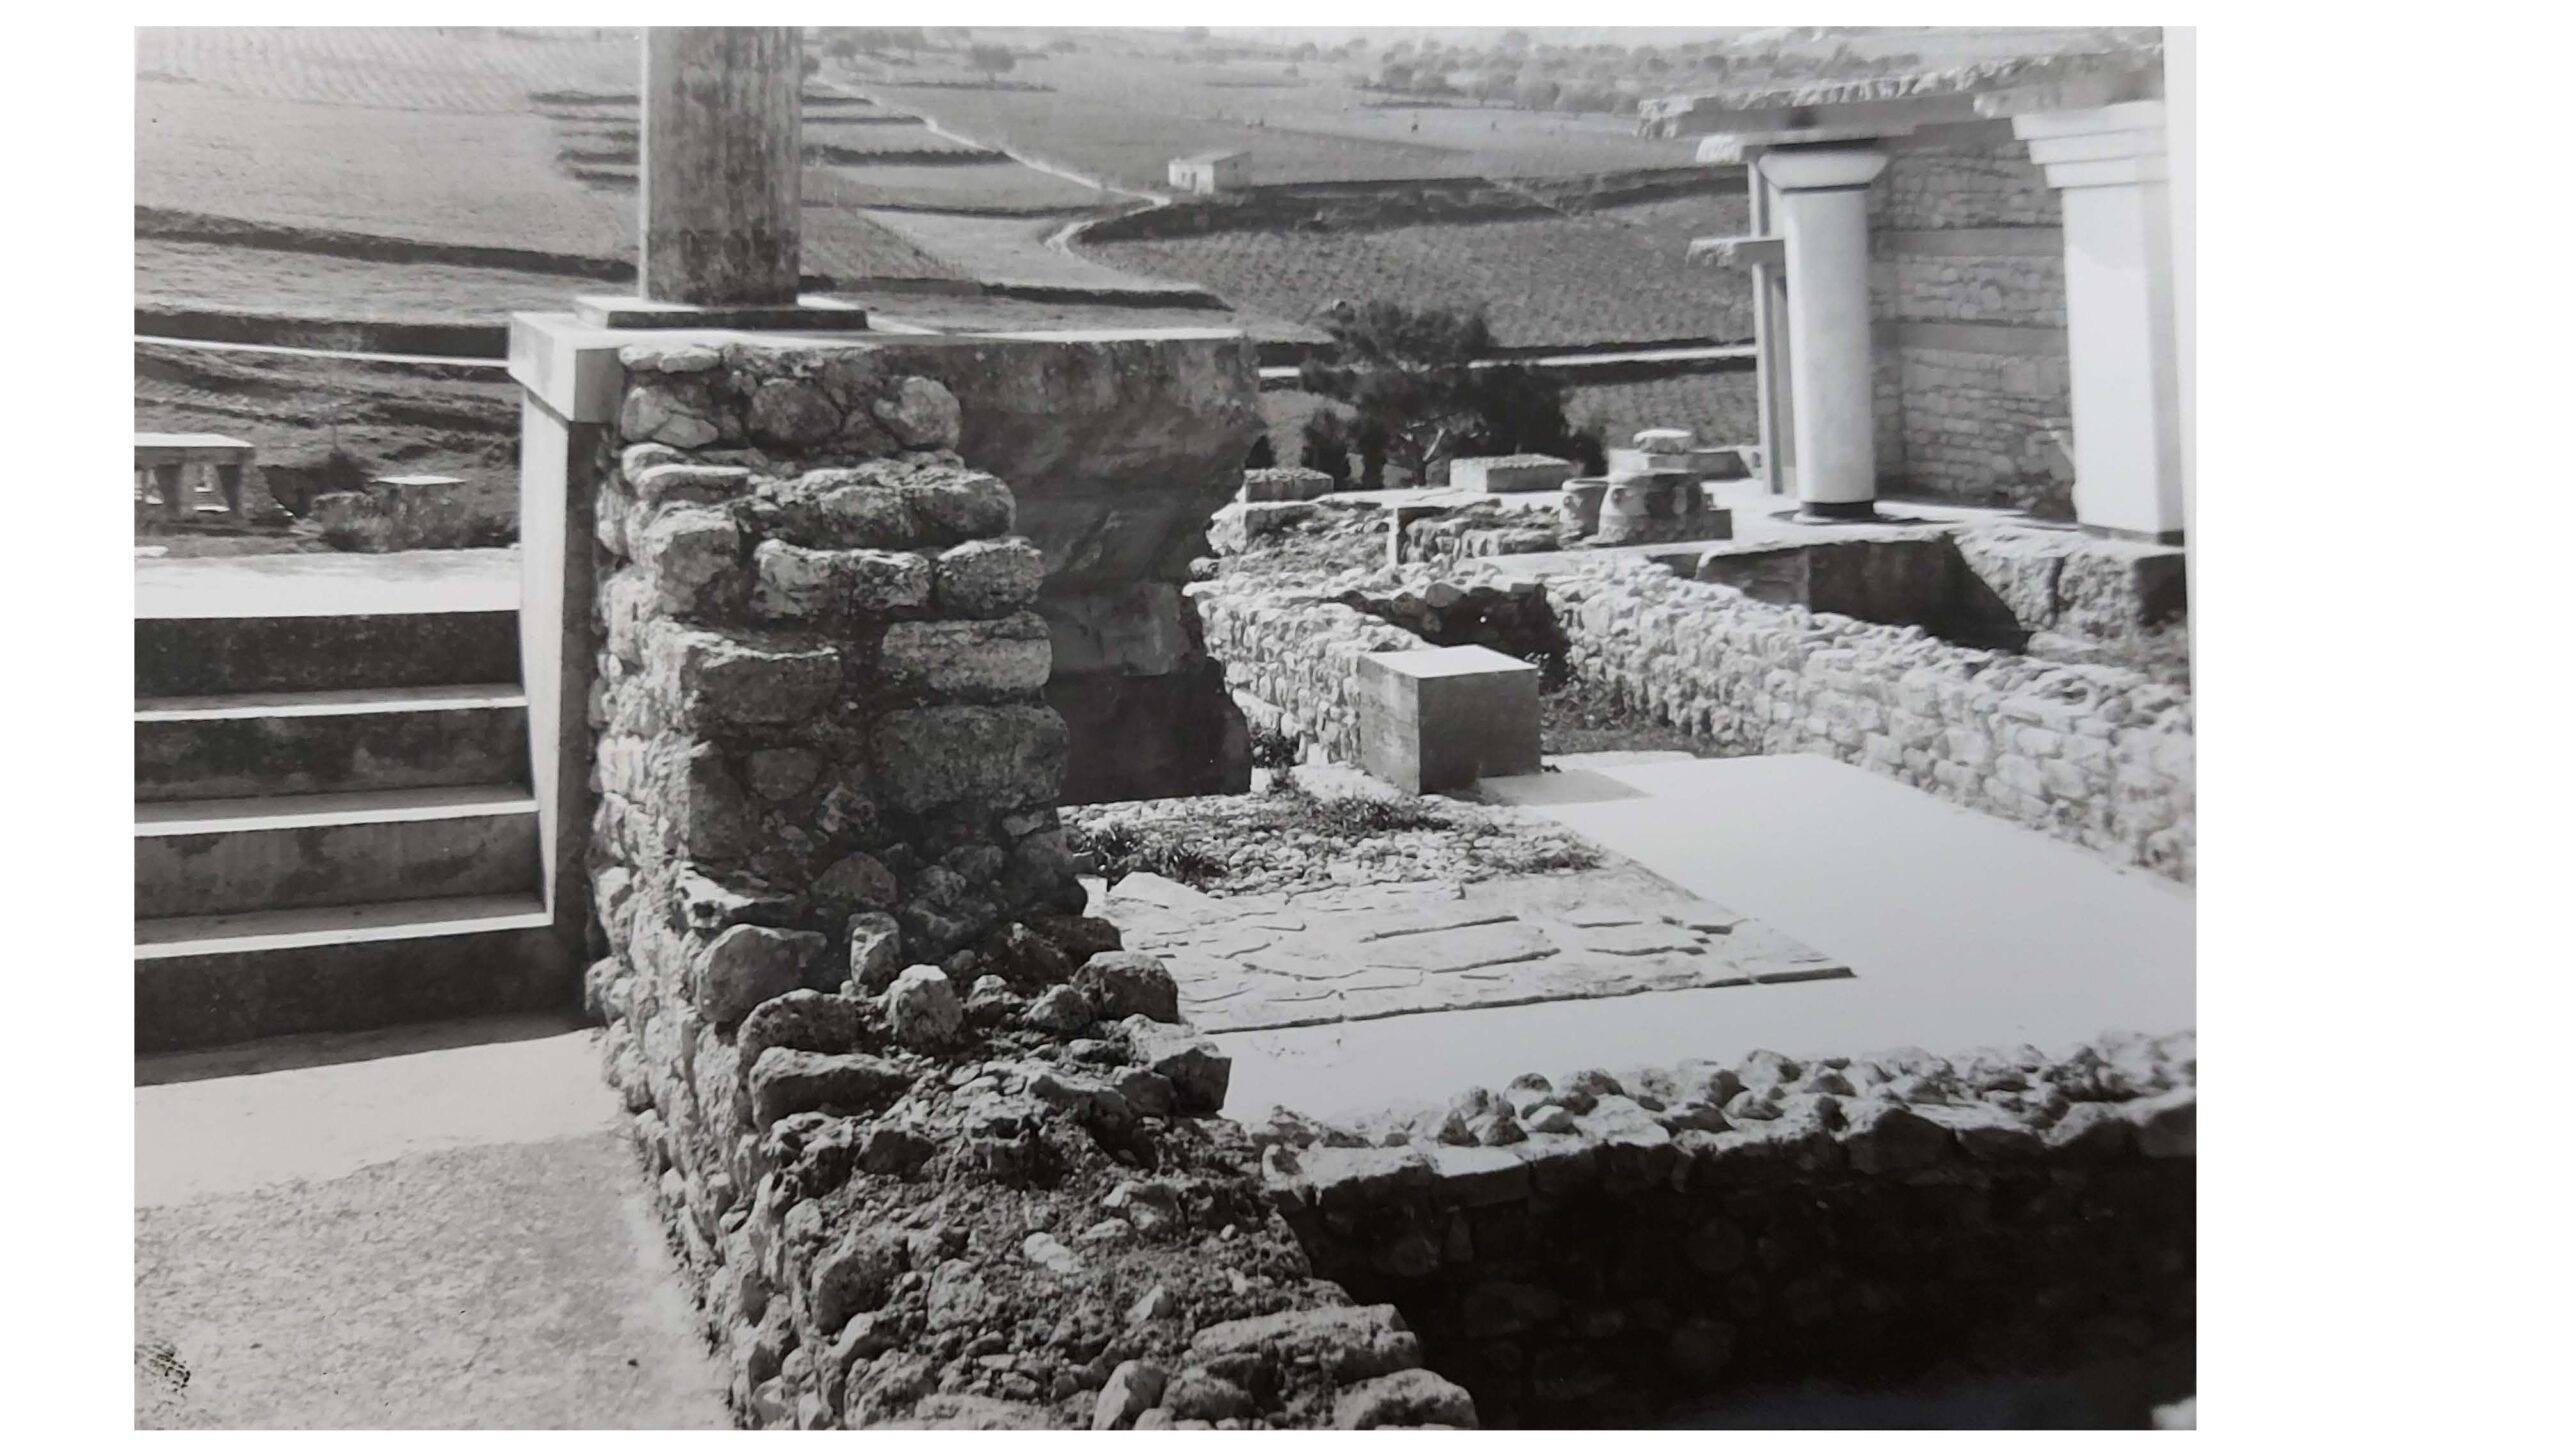 Knossos, looking South from the Piano Nobile. Photograph taken at the time of transfer to the Greek Archaeological Service, April 5, 1952. Source: BSA Archive, BSA Corporate Records- London (Knossos, Pre-1980, Box 1)